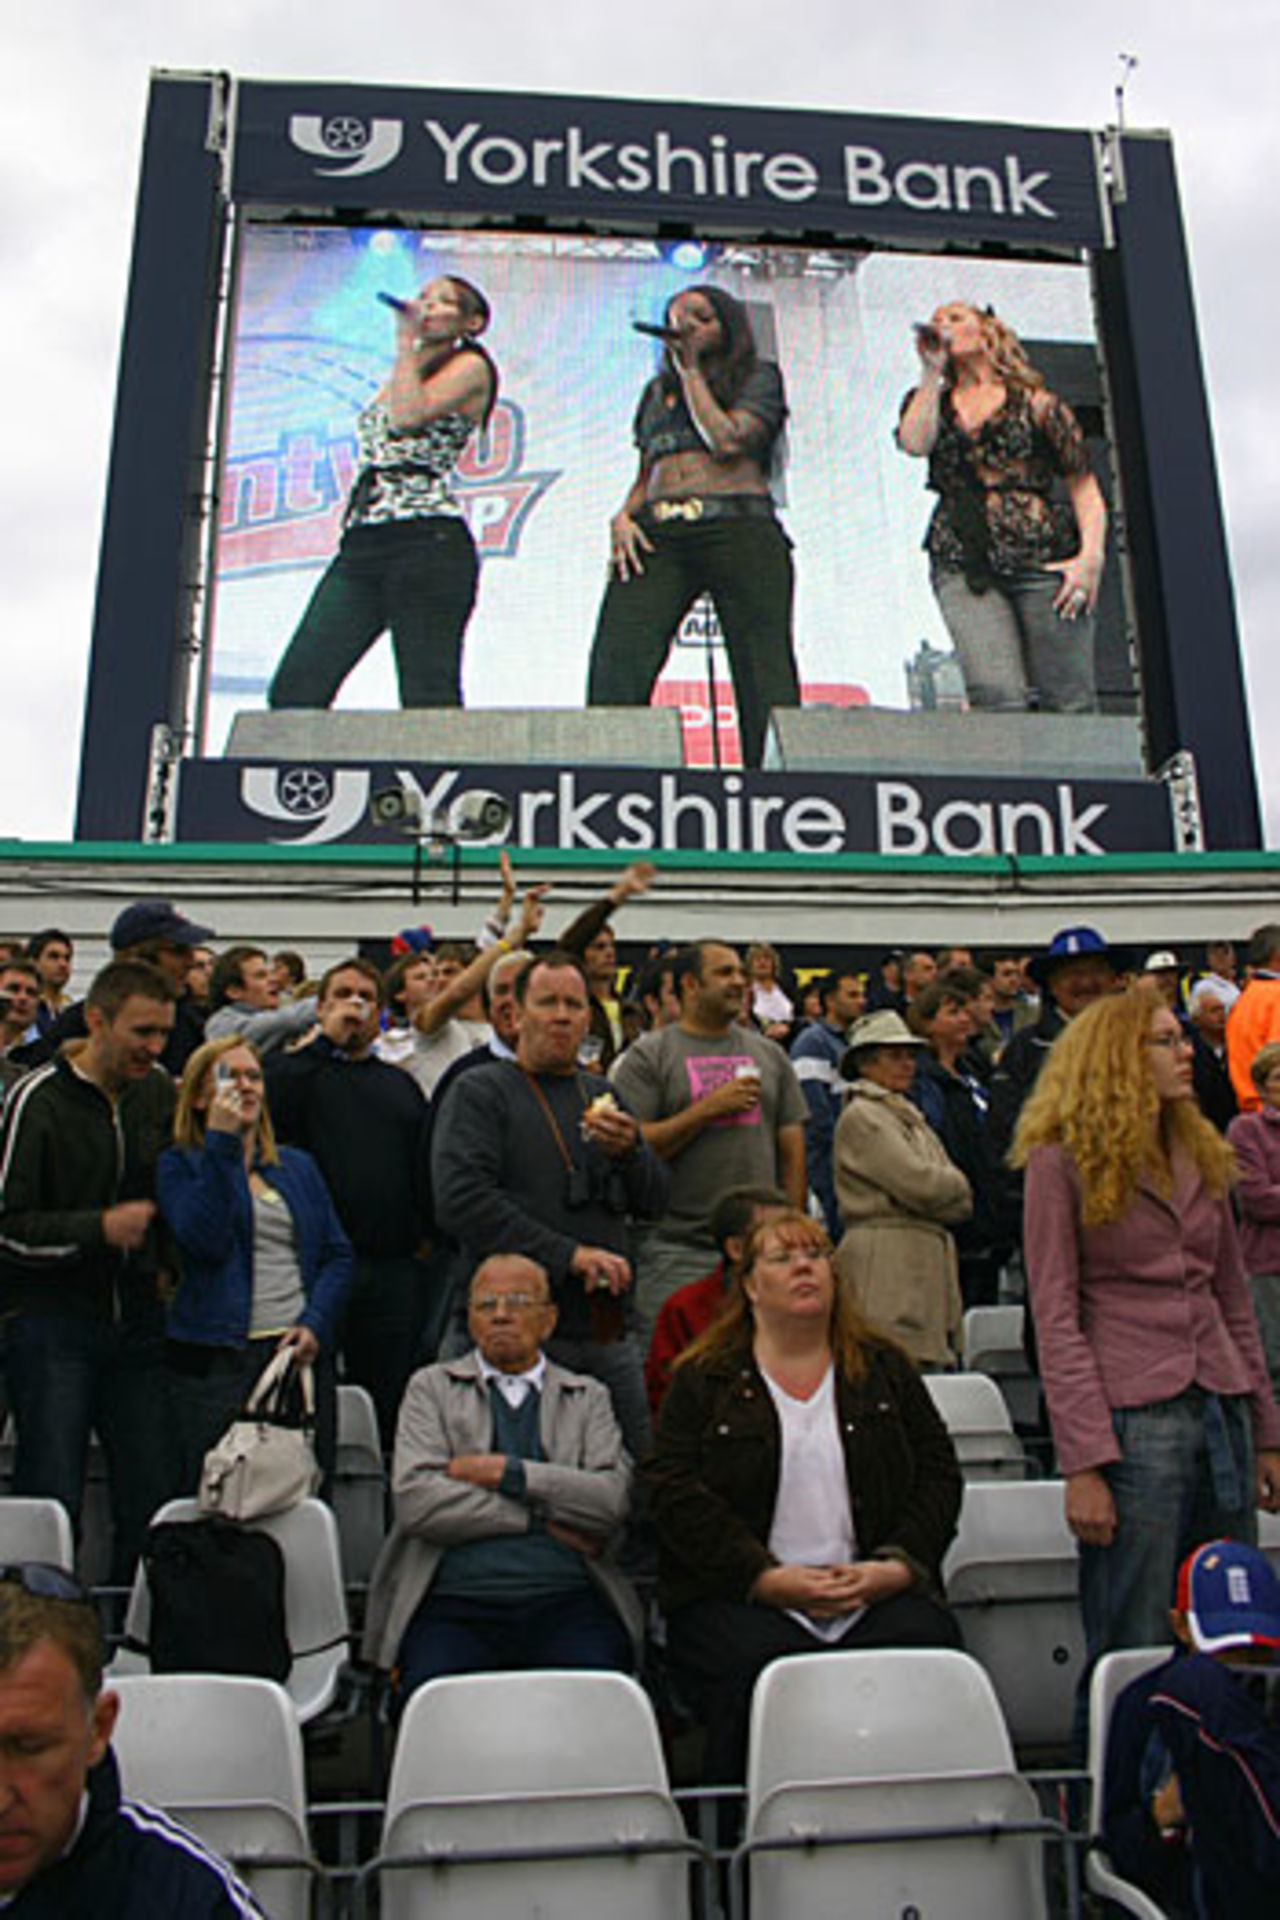 Amelle, Keisha and Heidi of the Sugababes perform at Trent Bridge during Twenty20 finals day, August 12, 2006